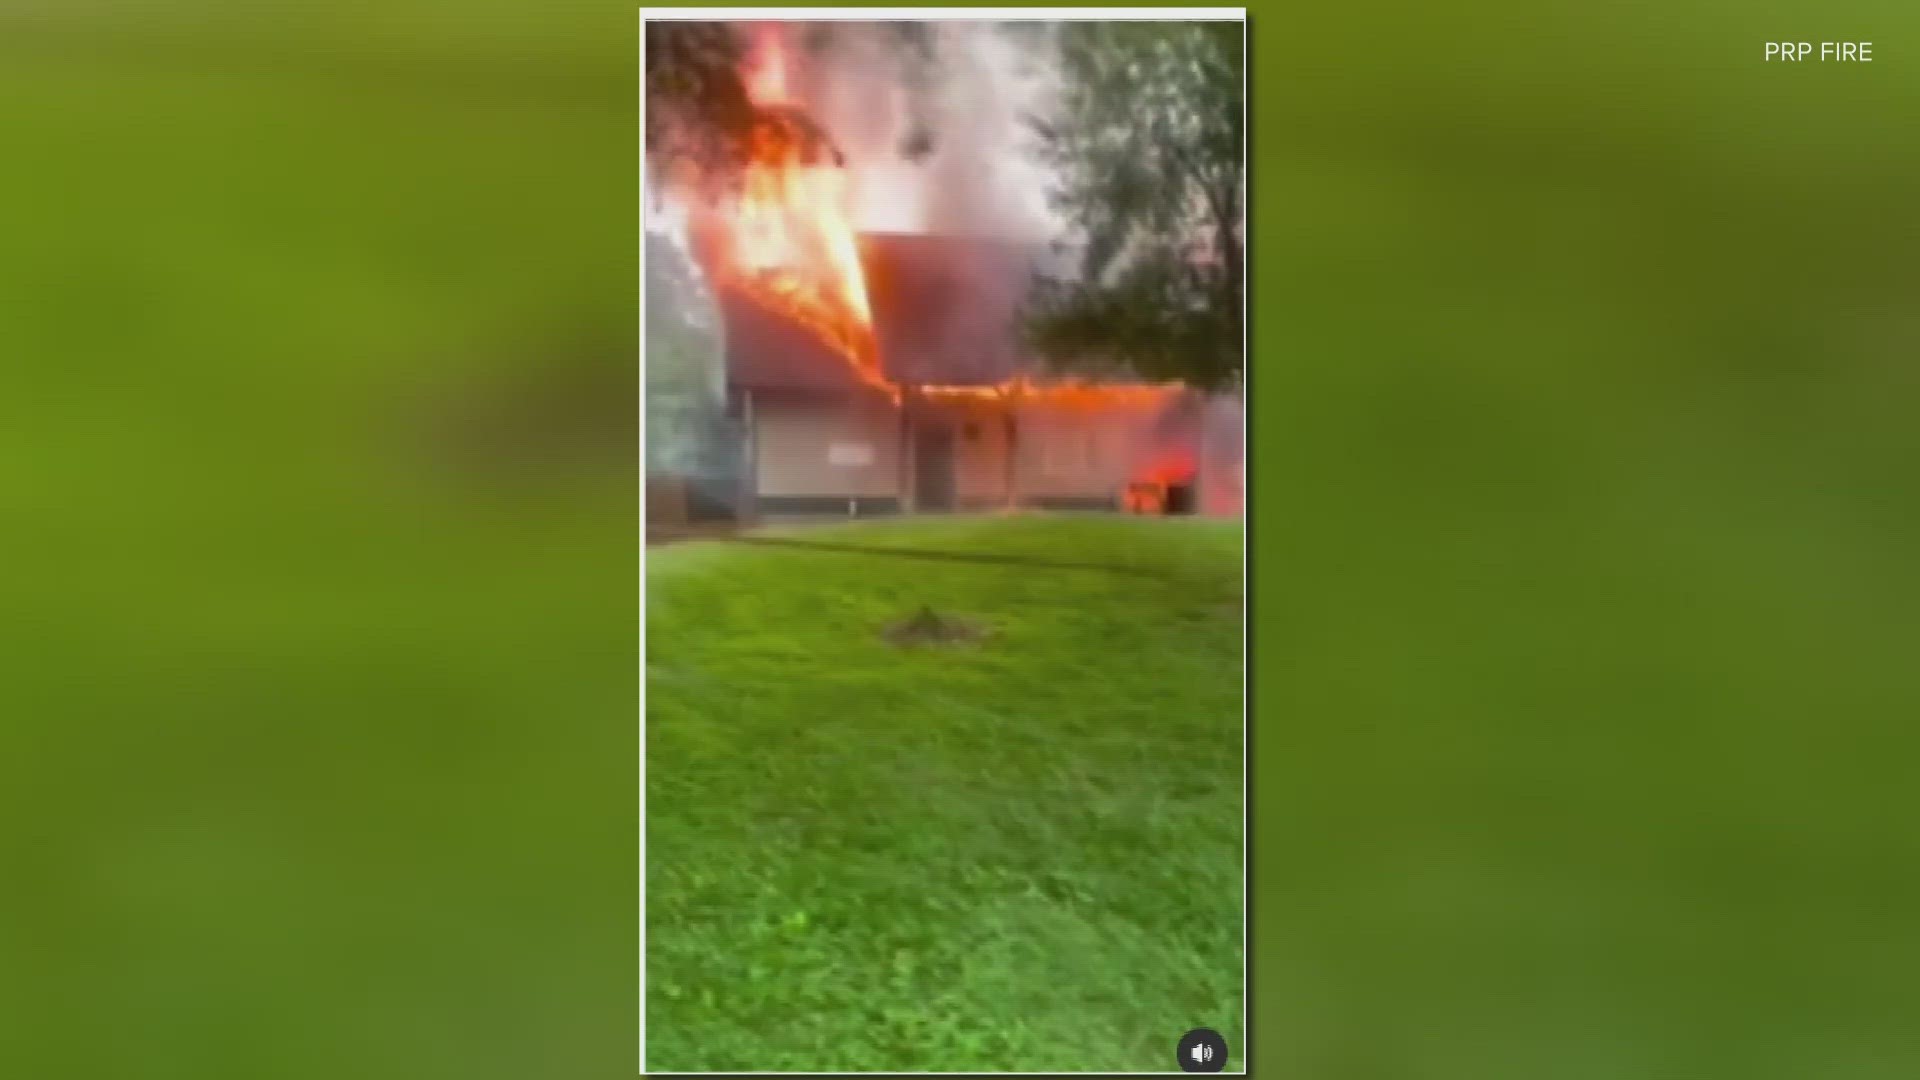 A popular gathering spot in Louisville caught fire on Monday morning. Officials don't believe the pavilion will be useable anytime in the foreseeable future.